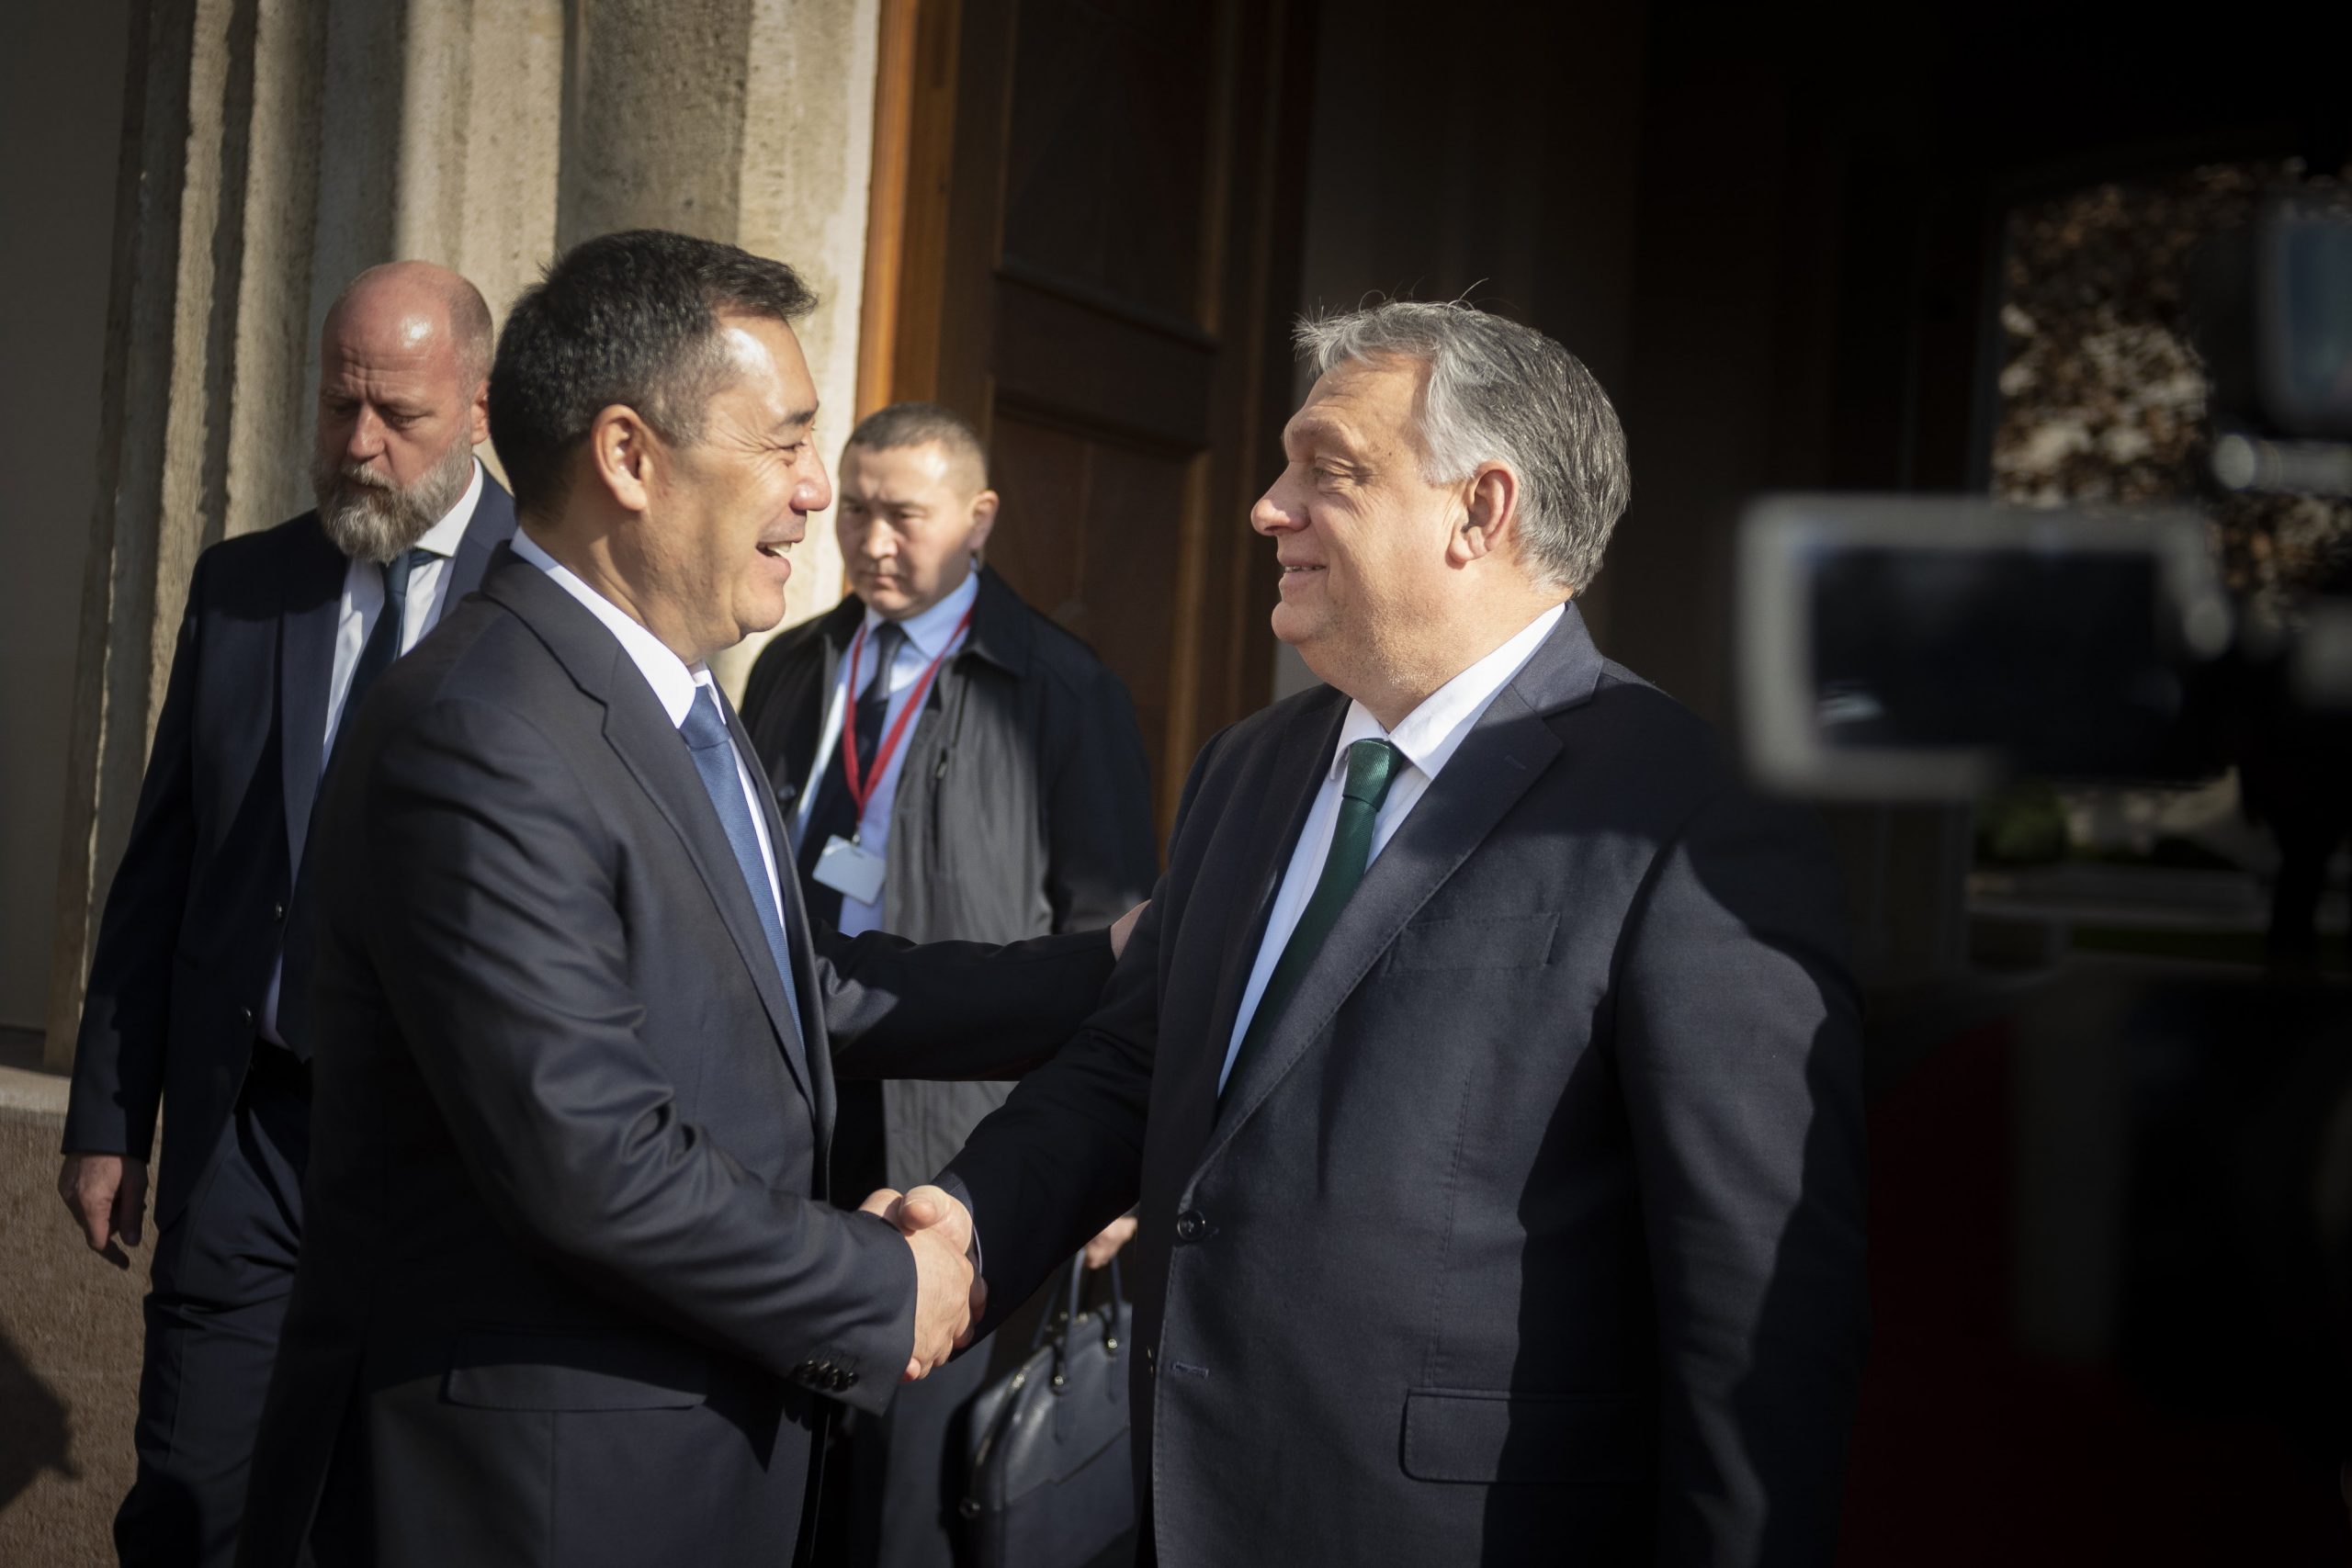 Hungary and Kyrgyzstan to Join Forces against Terrorism